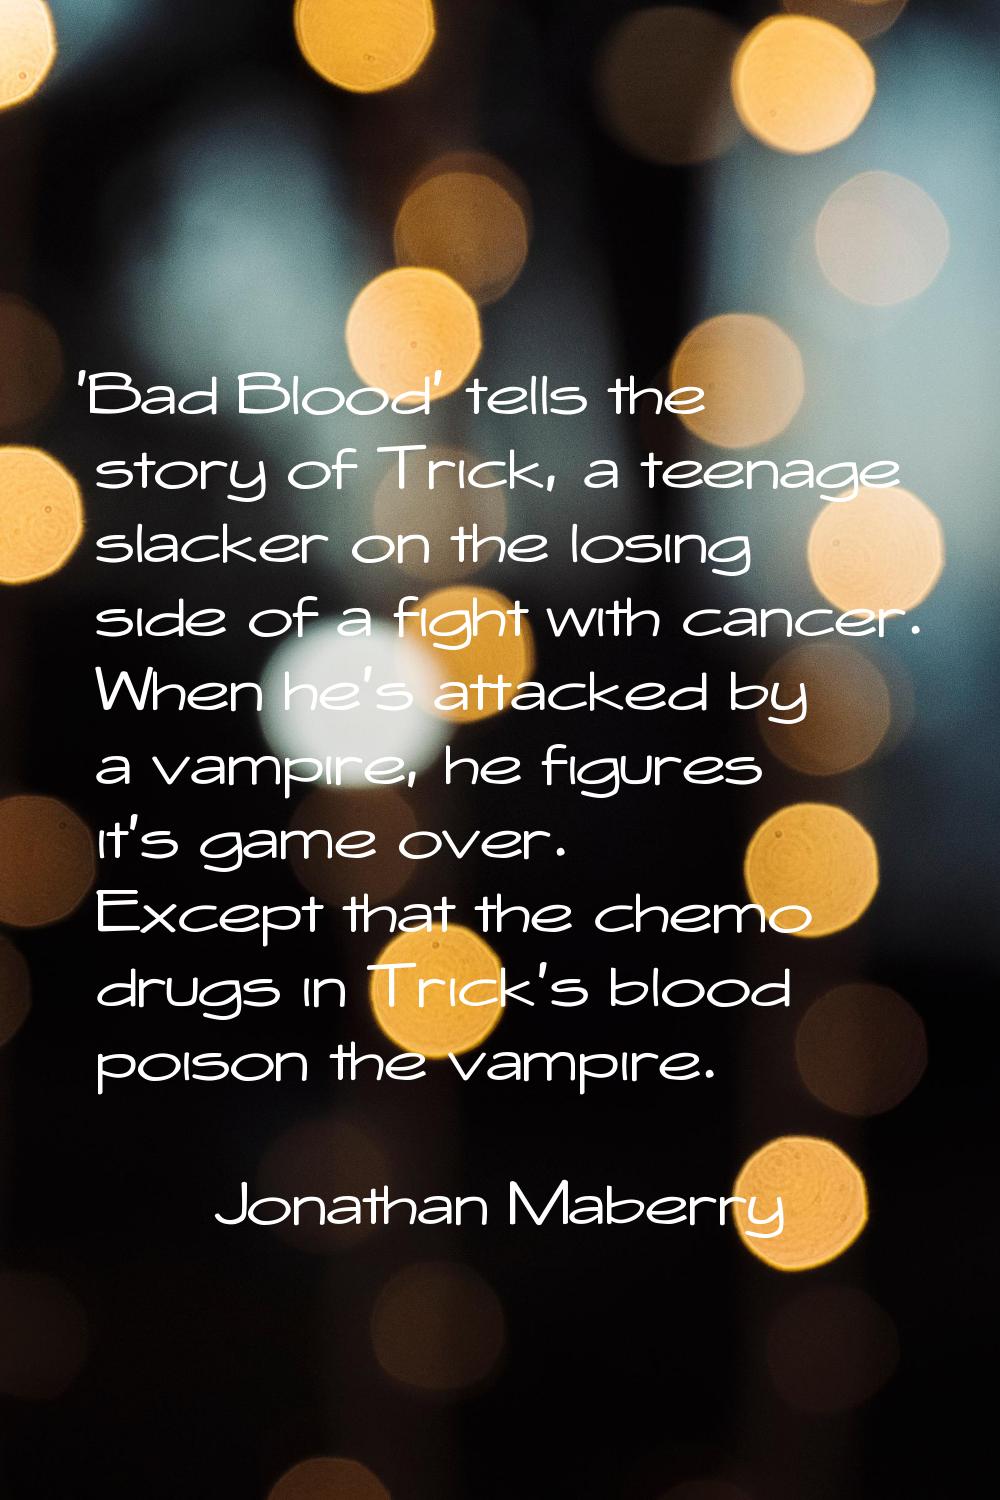 'Bad Blood' tells the story of Trick, a teenage slacker on the losing side of a fight with cancer. 